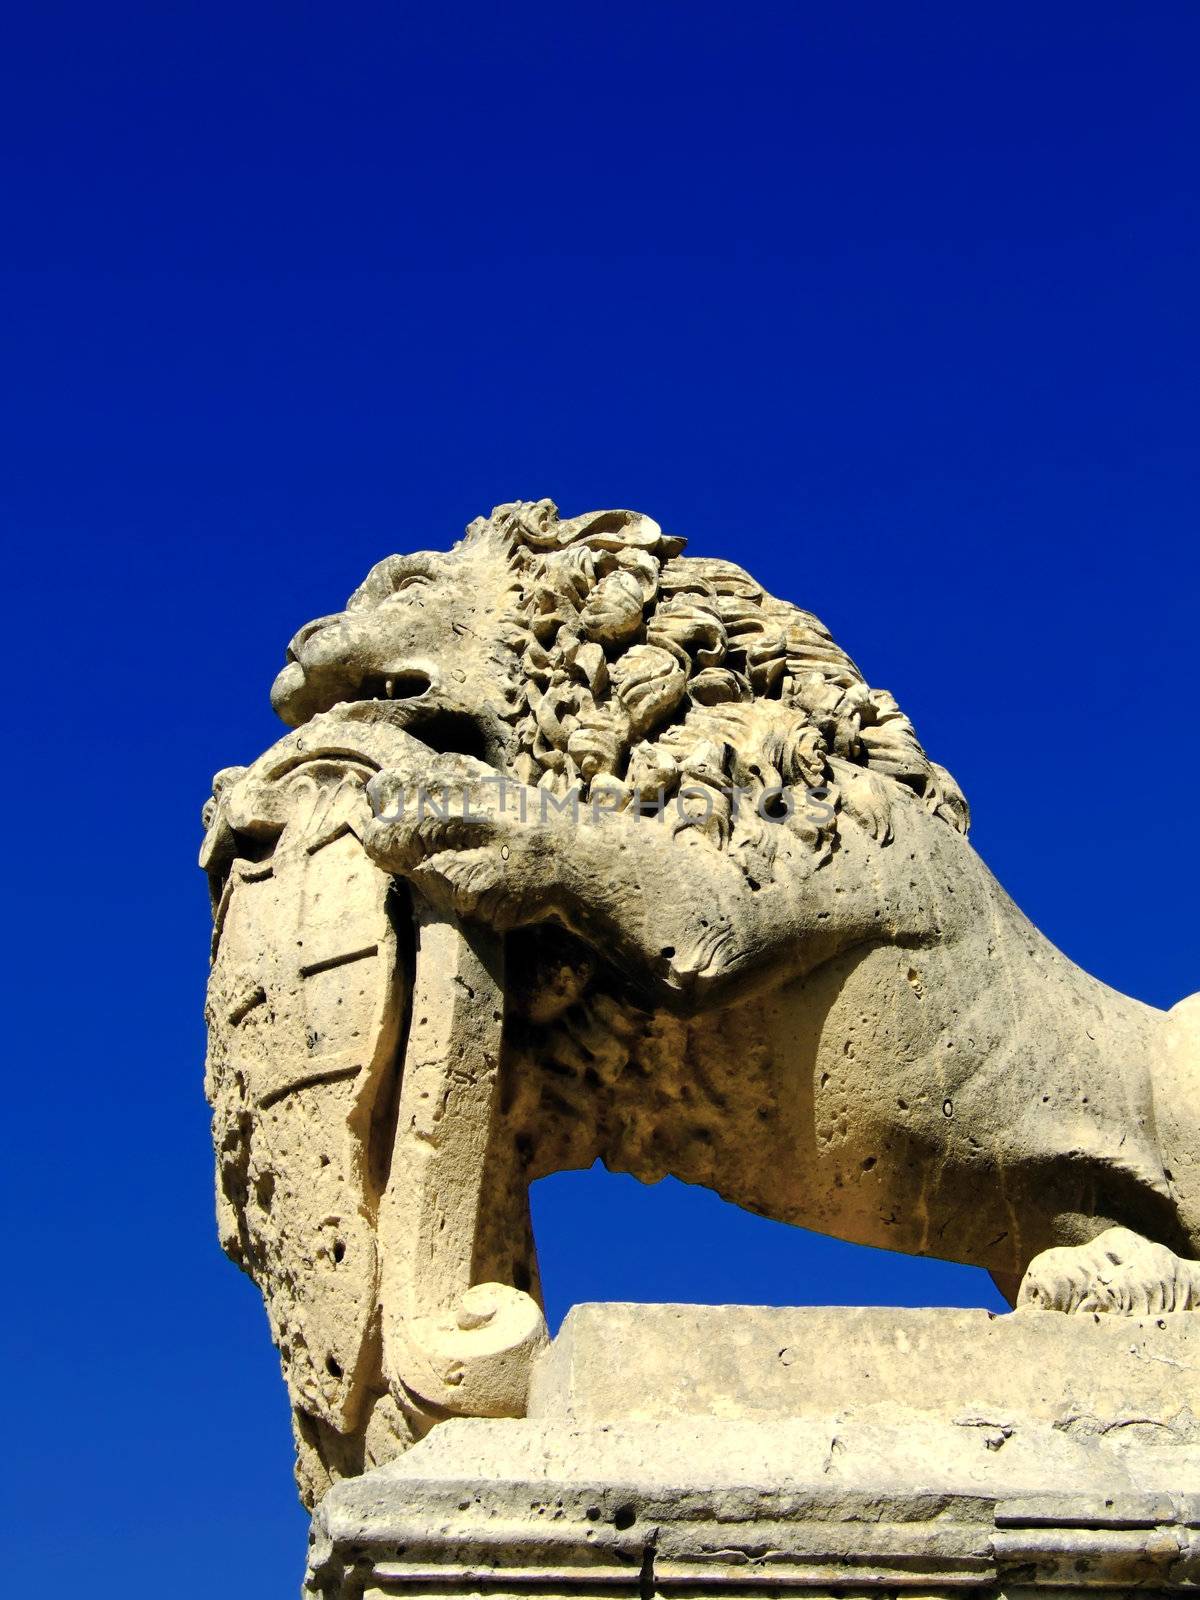 Medieval stone sculpture of lion guarding the gates of the old city of Mdina in Malta